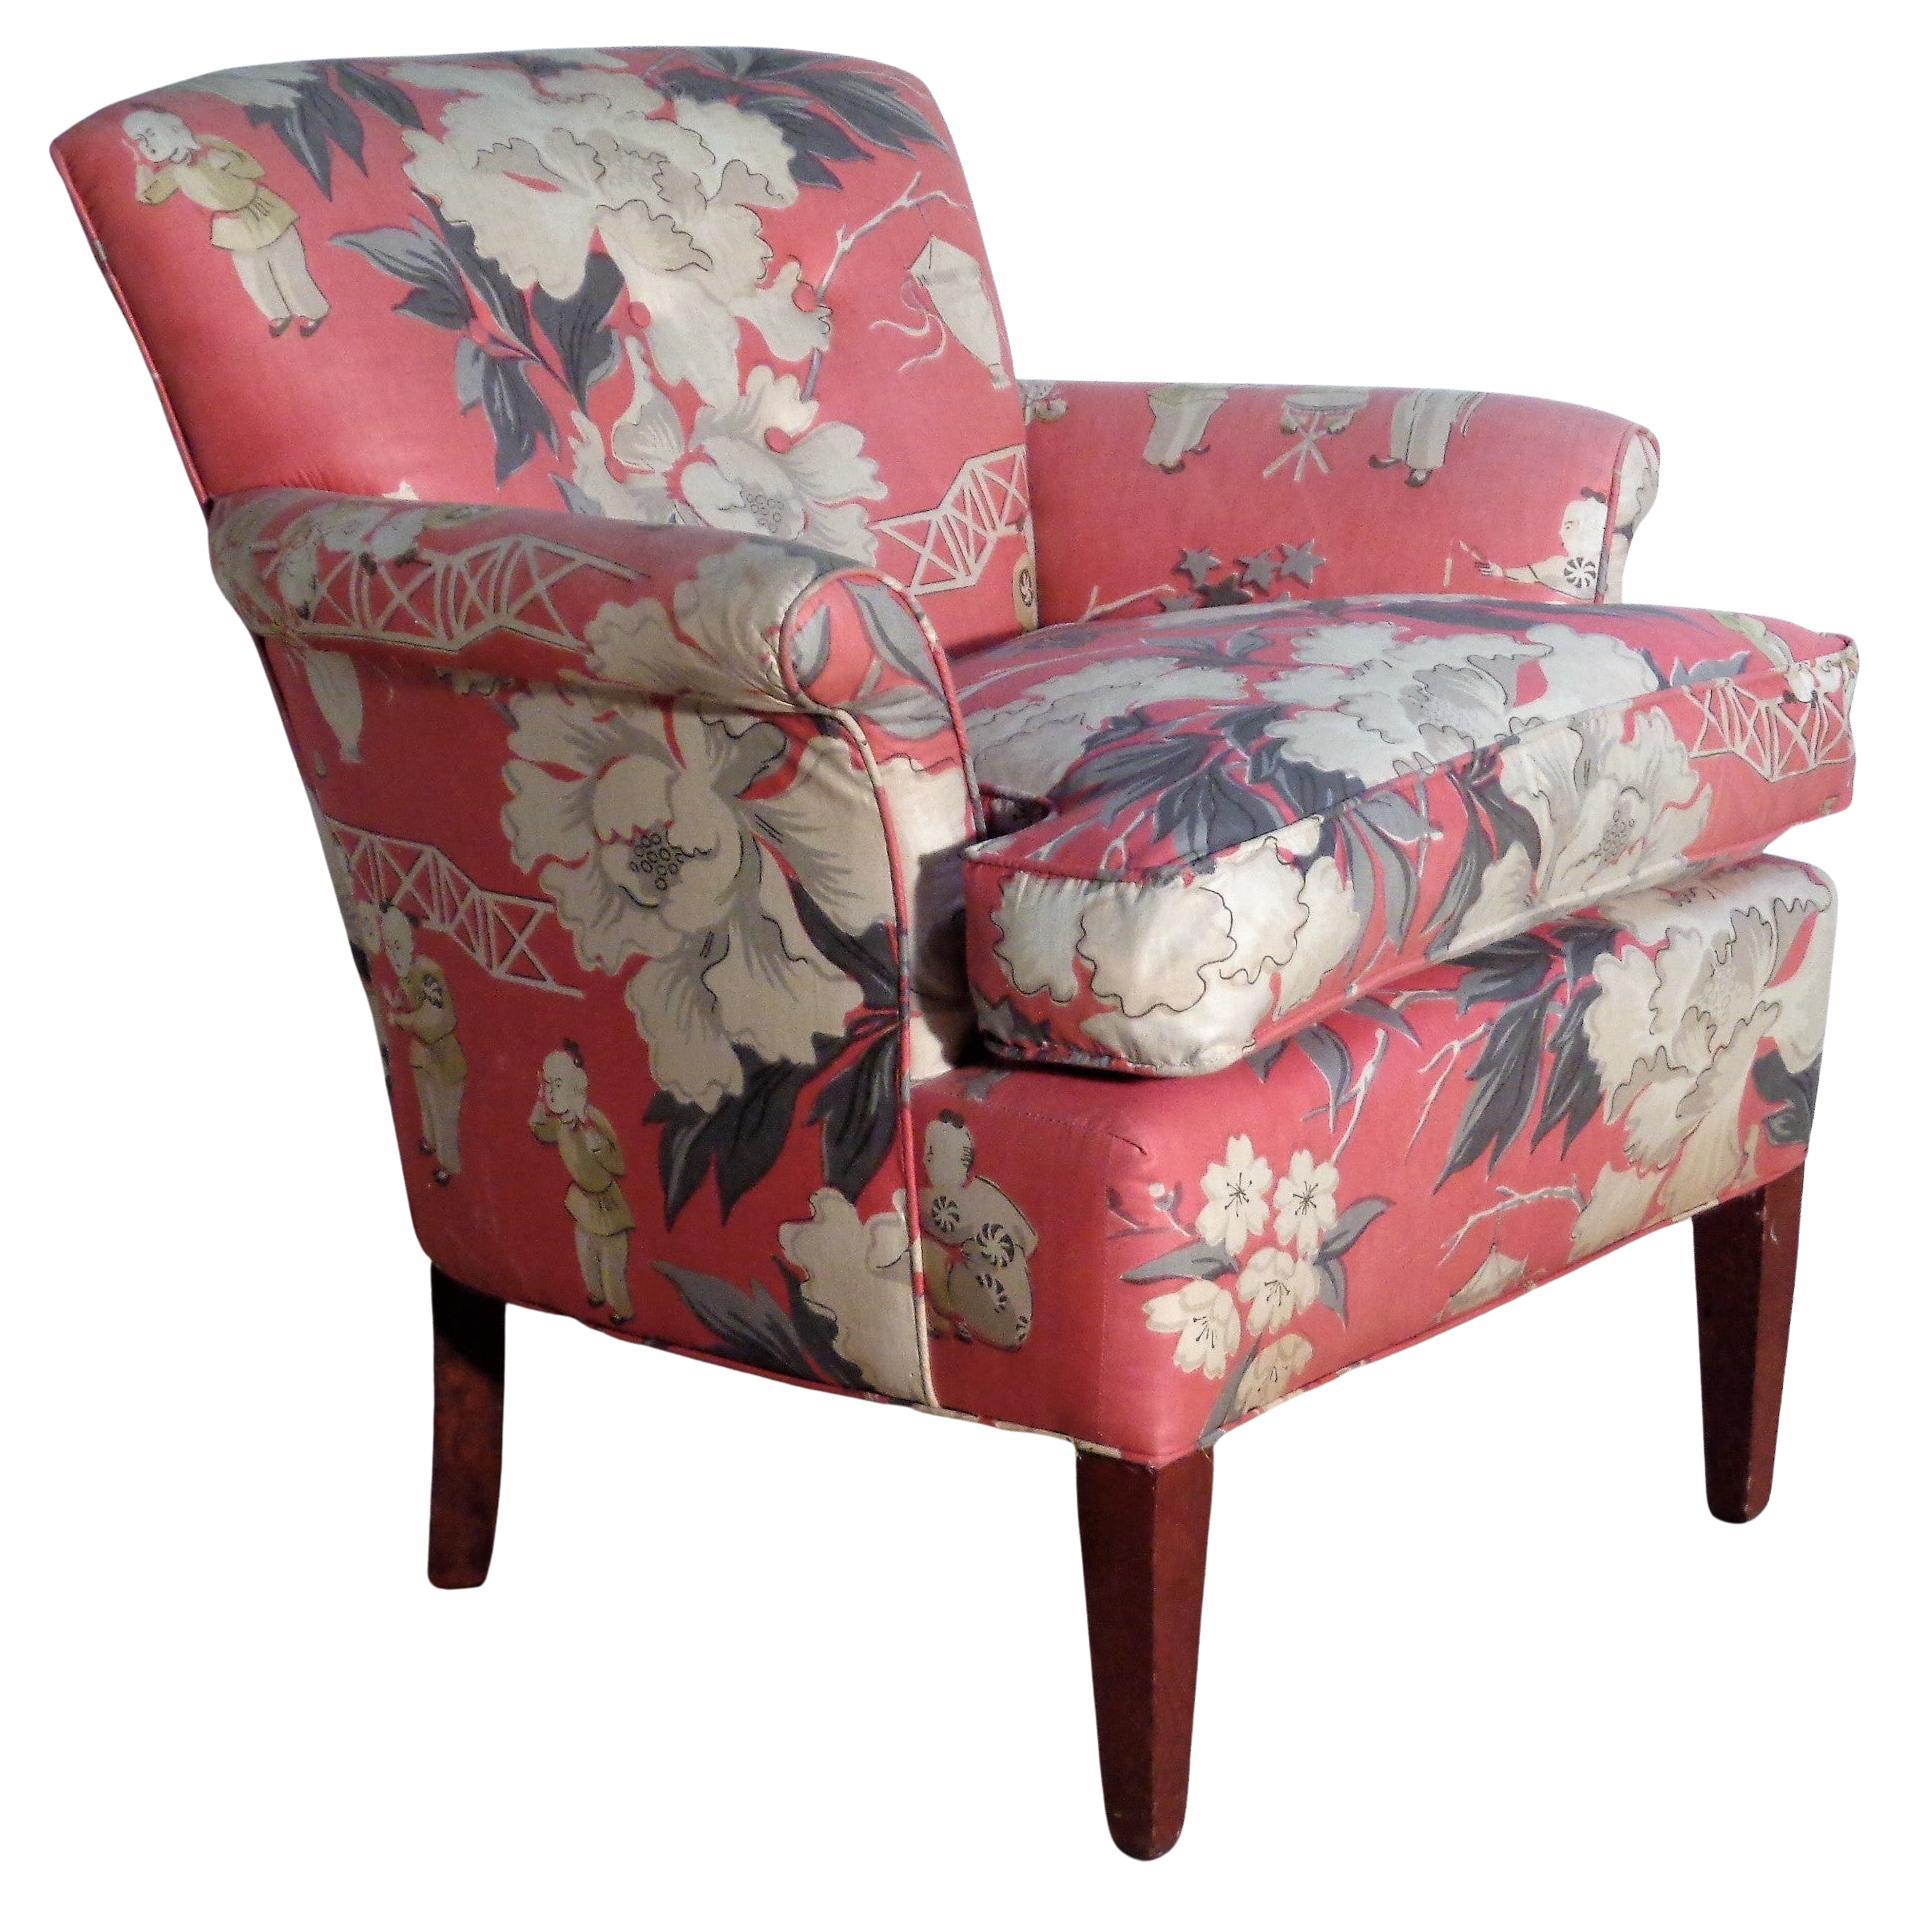  Dorothy Draper Style Original Chinoiserie Upholstered Lounge Chair, 1940's For Sale 8